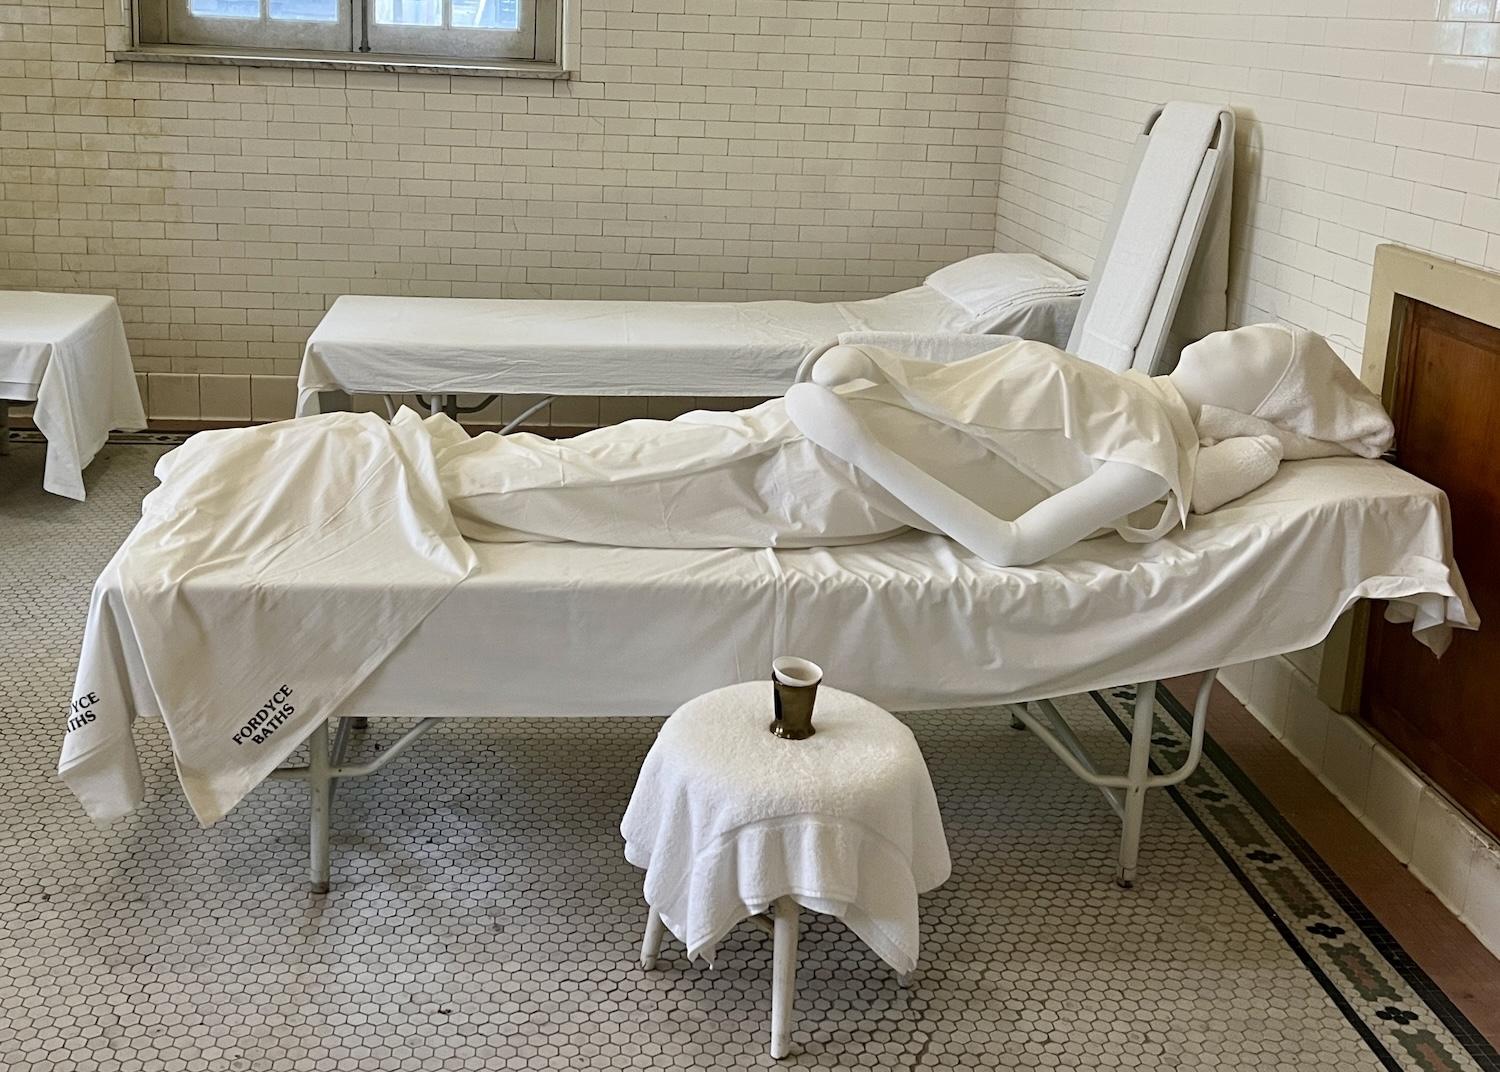 At the Hot Springs National Park visitor center/museum, you can see how the bathing regimen included time in a "pack room" with hot and cold towels.